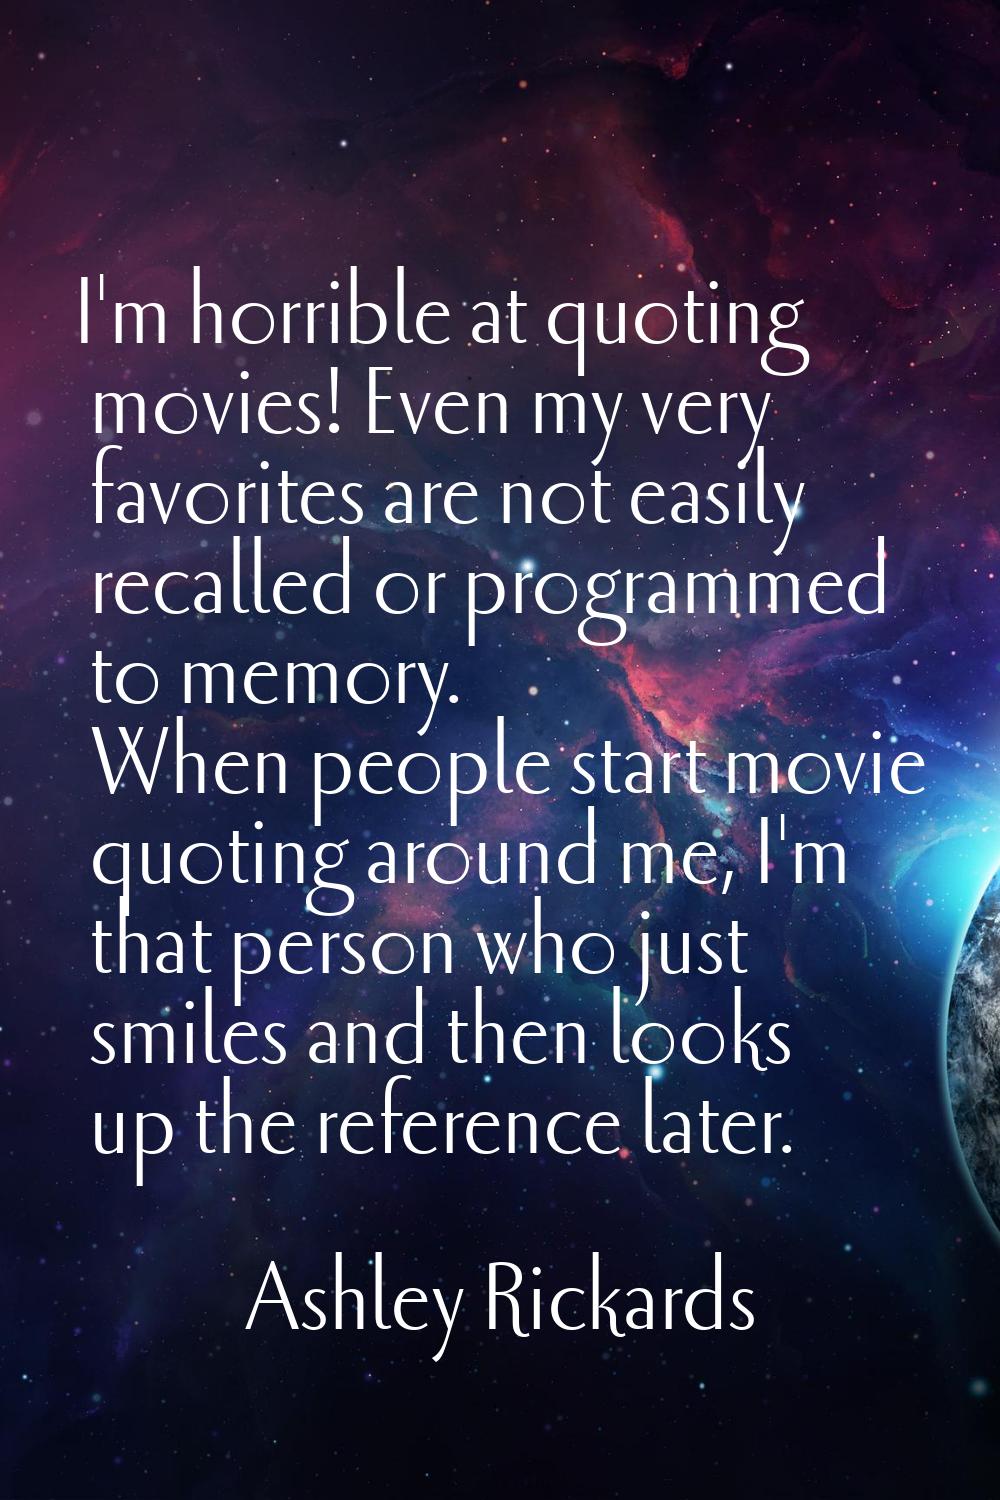 I'm horrible at quoting movies! Even my very favorites are not easily recalled or programmed to mem